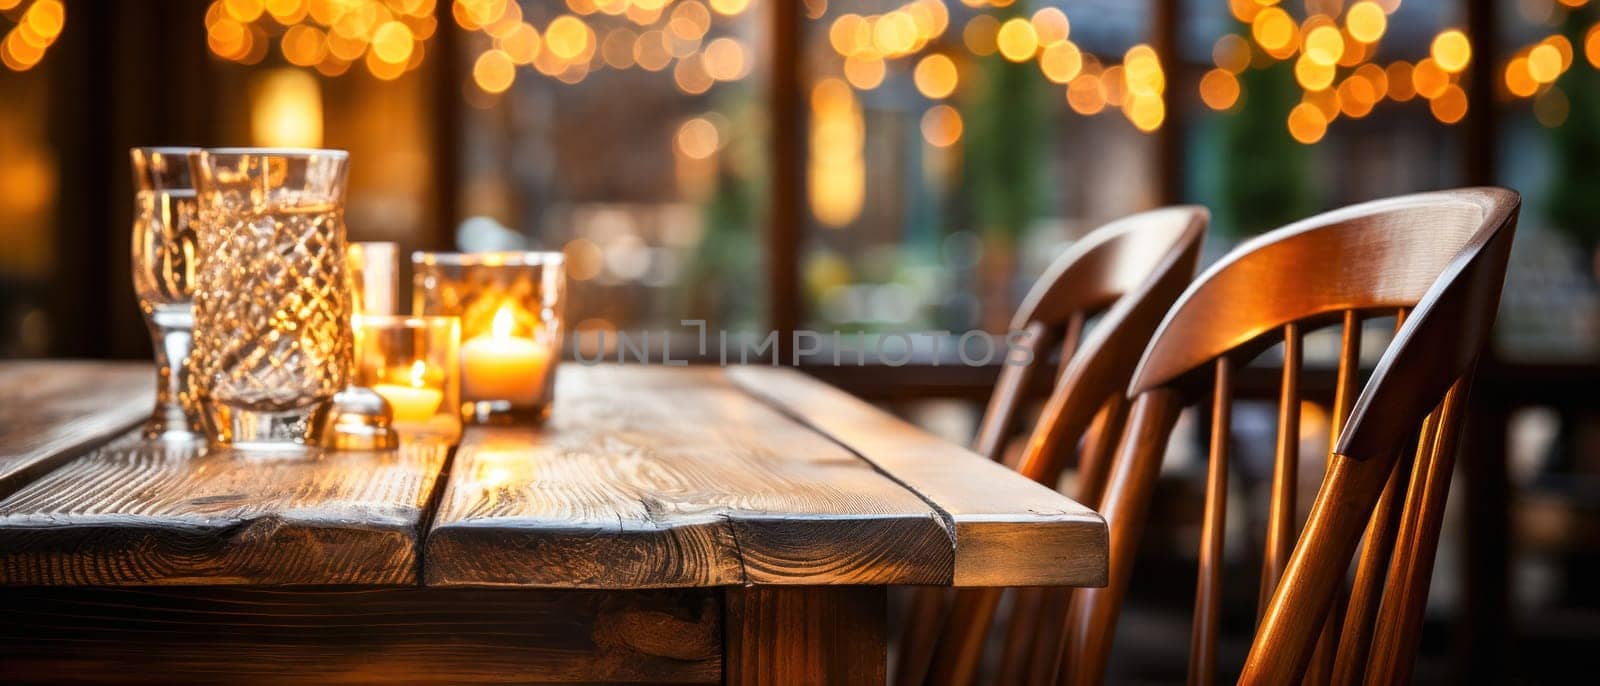 Wooden table on garland background with festive lights.